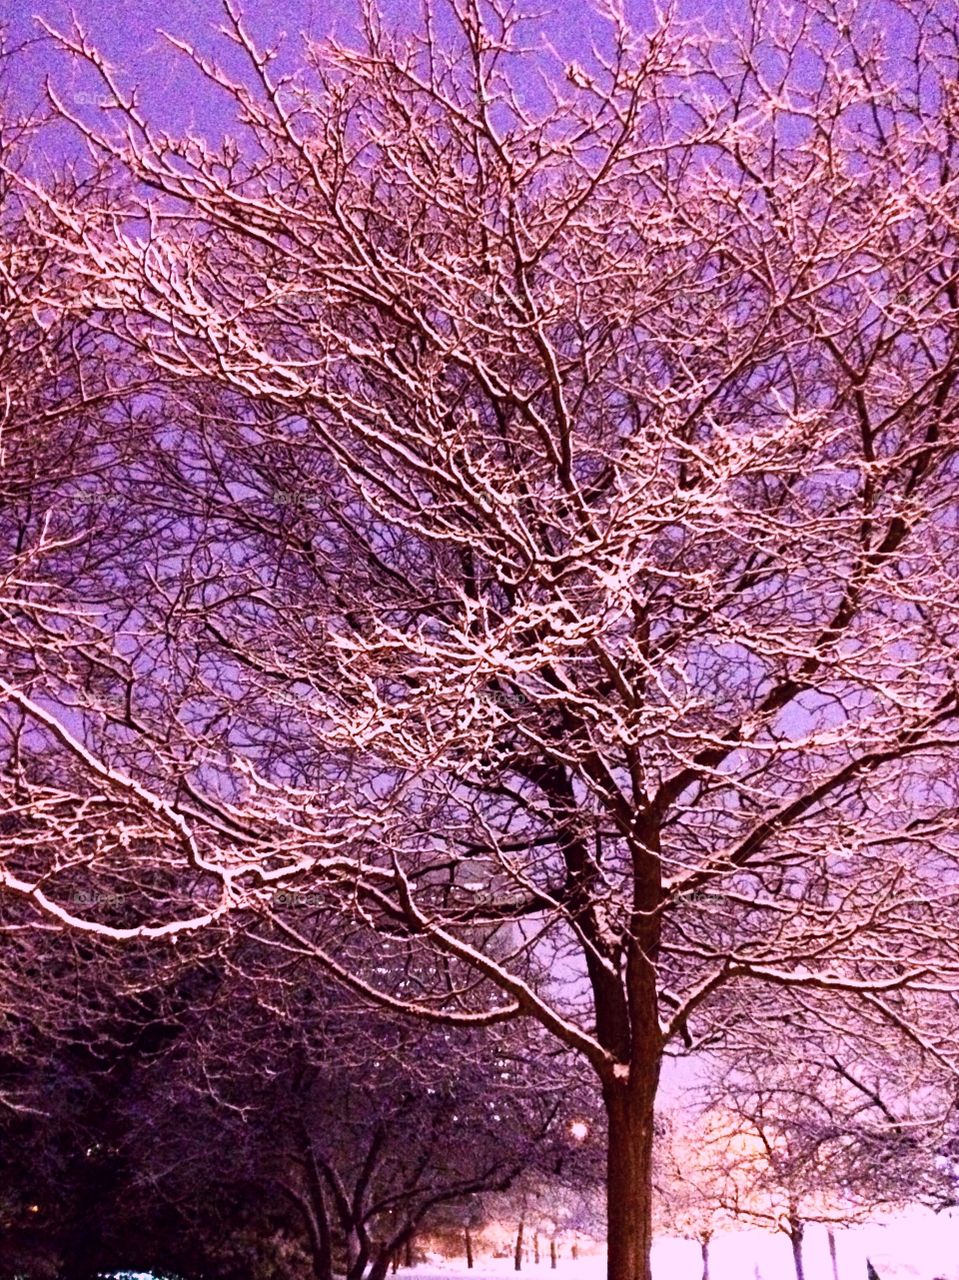 Tree covered in snow against purple sky